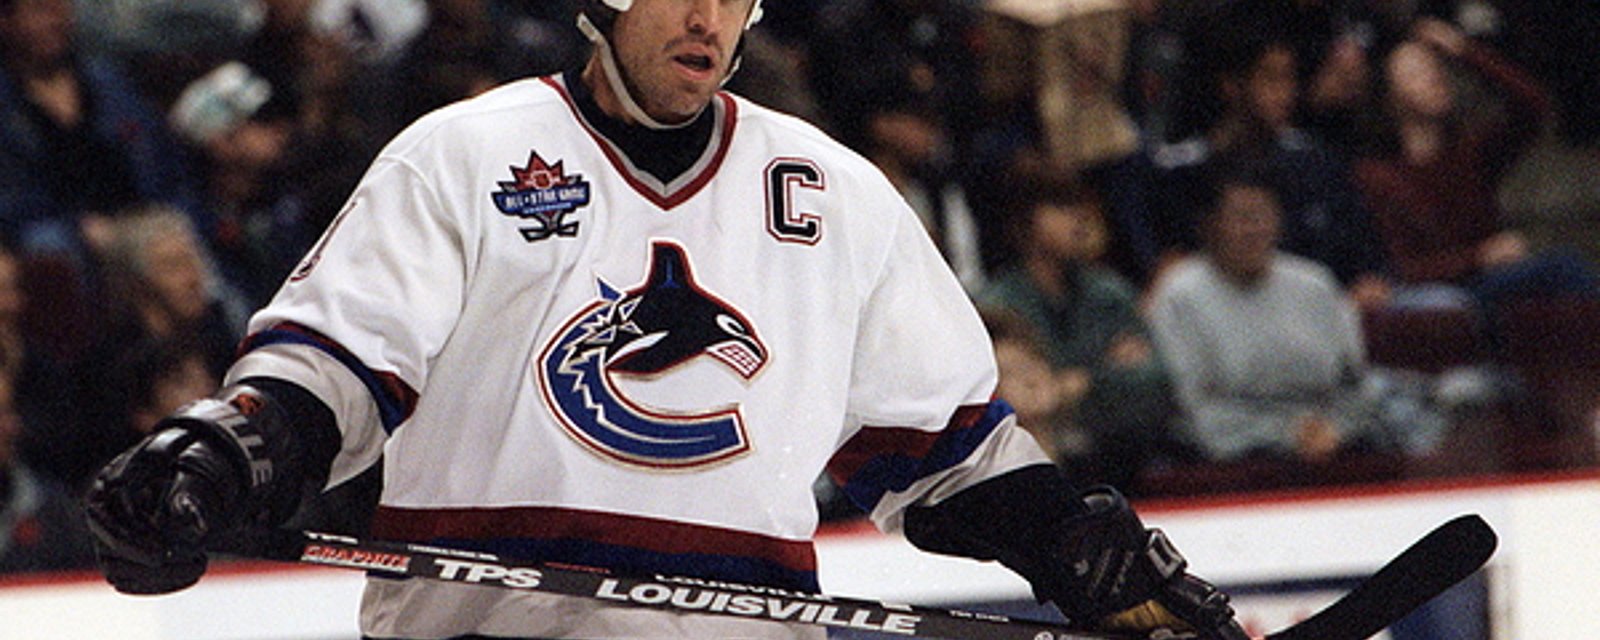 Twenty years ago today the Canucks signed Mark Messier 